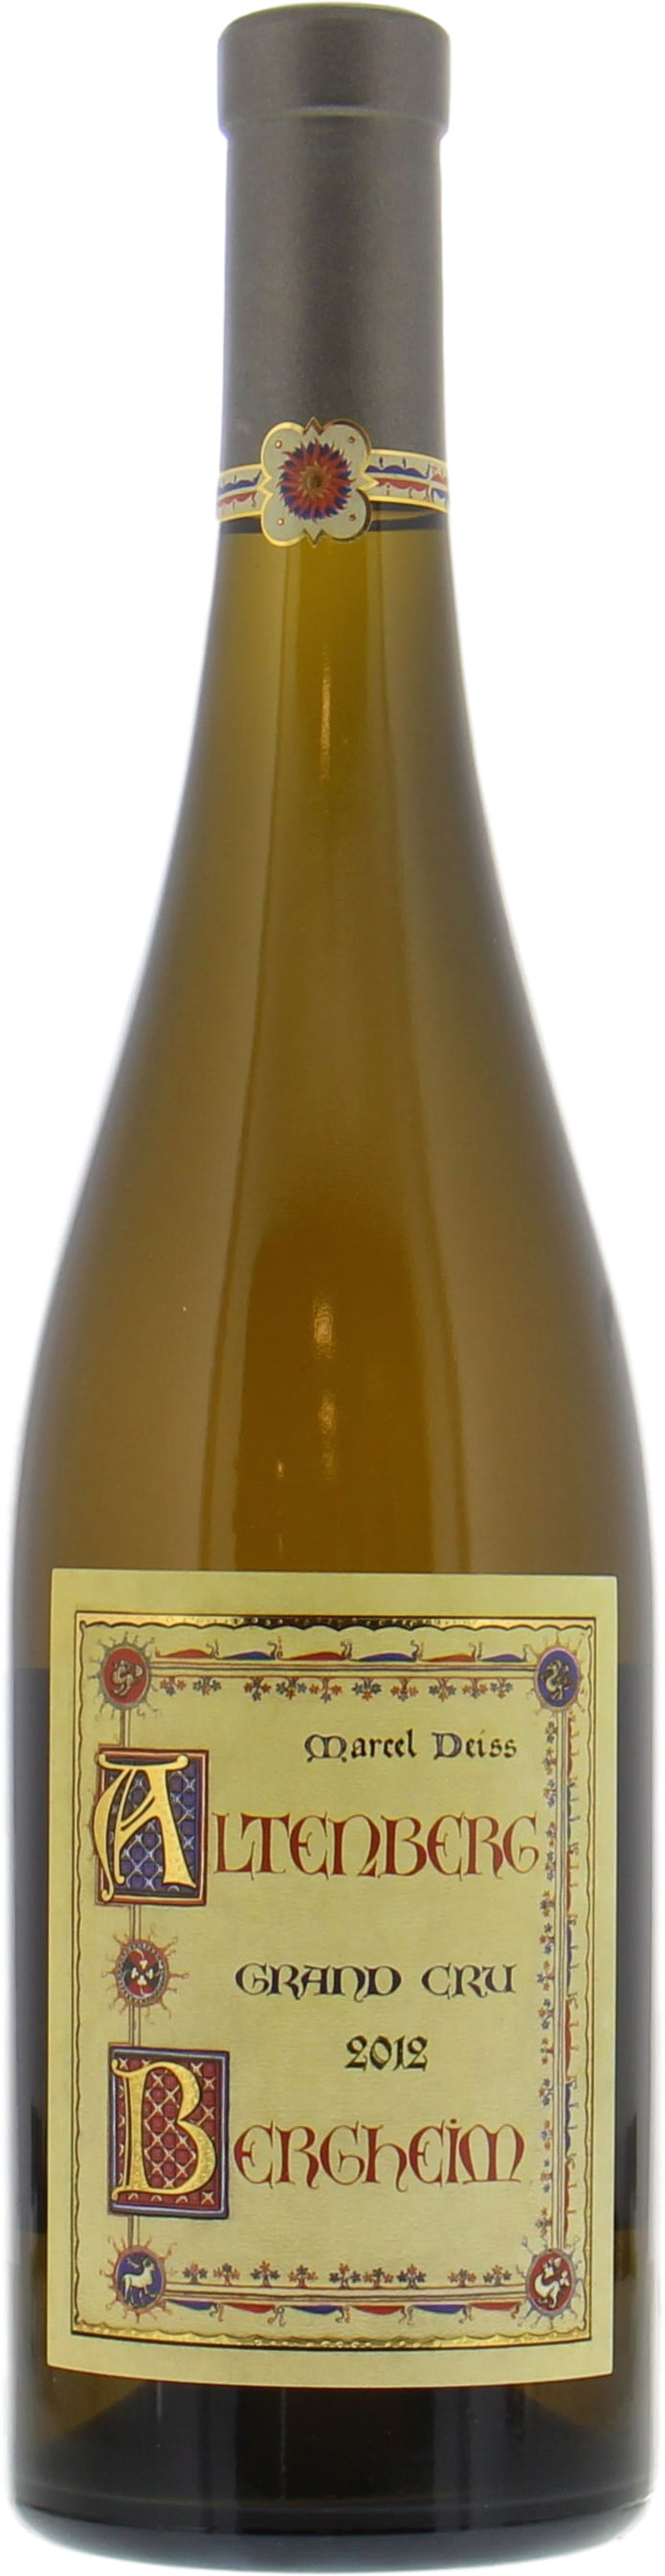 Marcel Deiss - Mambourg 2012 Perfect